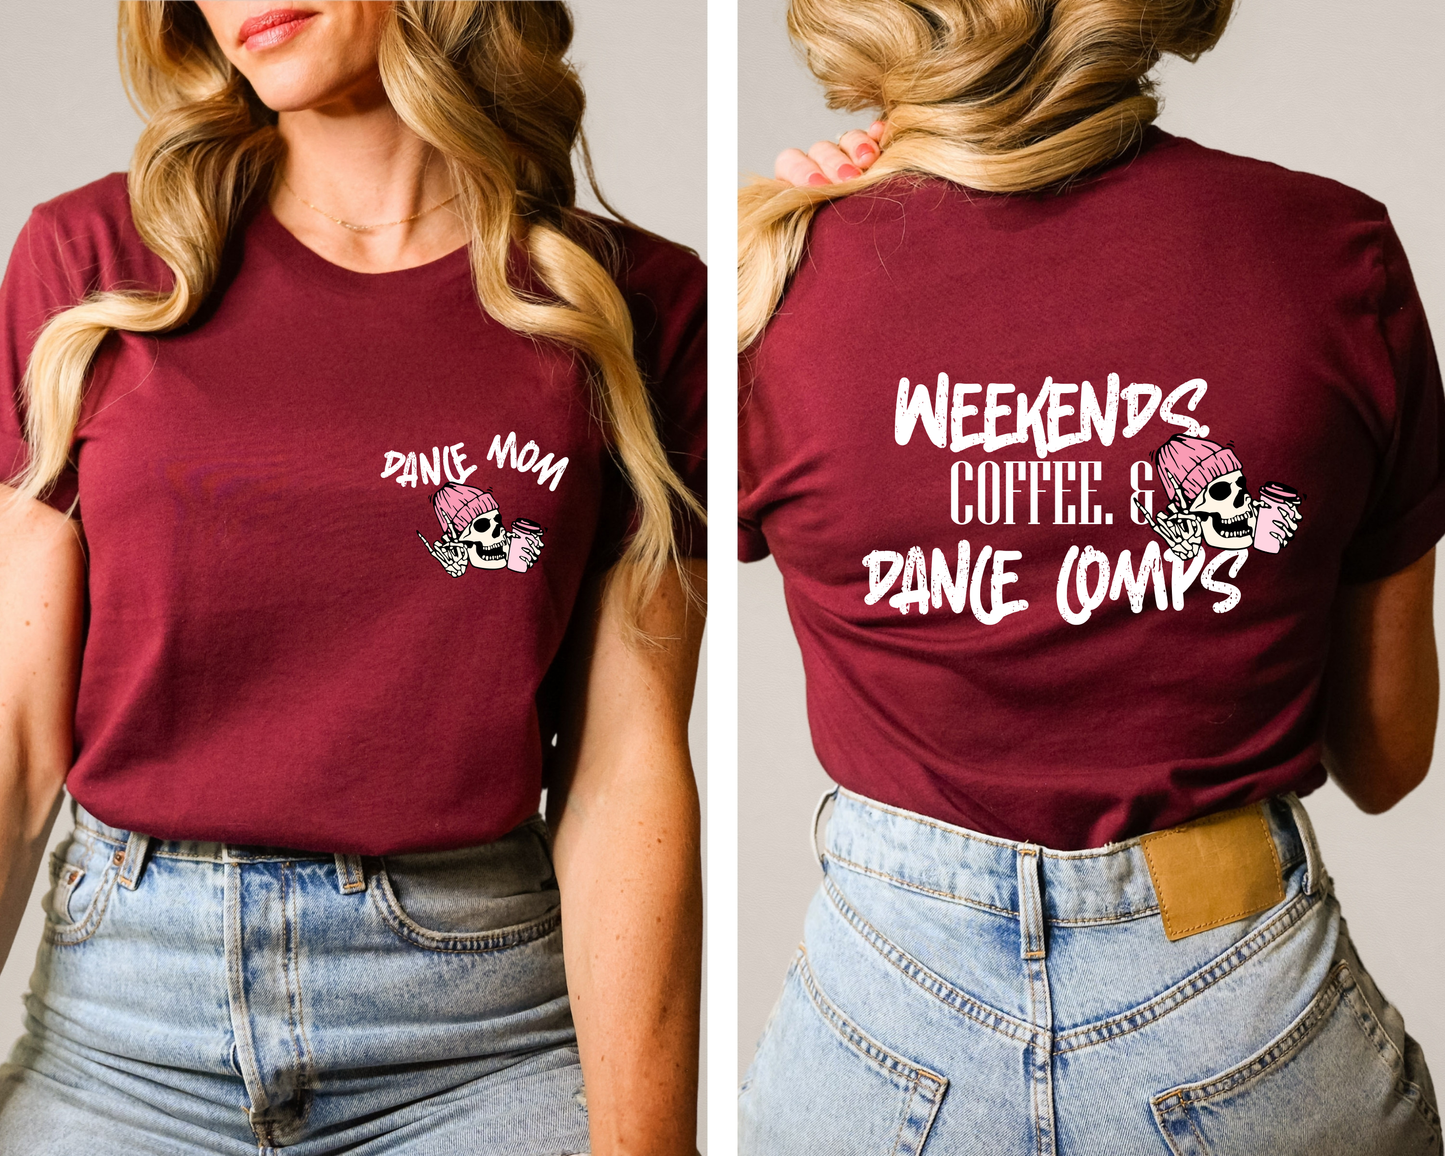  "Graphic tee featuring a playful 'Weekends Coffee Dance' design for coffee and dance lovers."